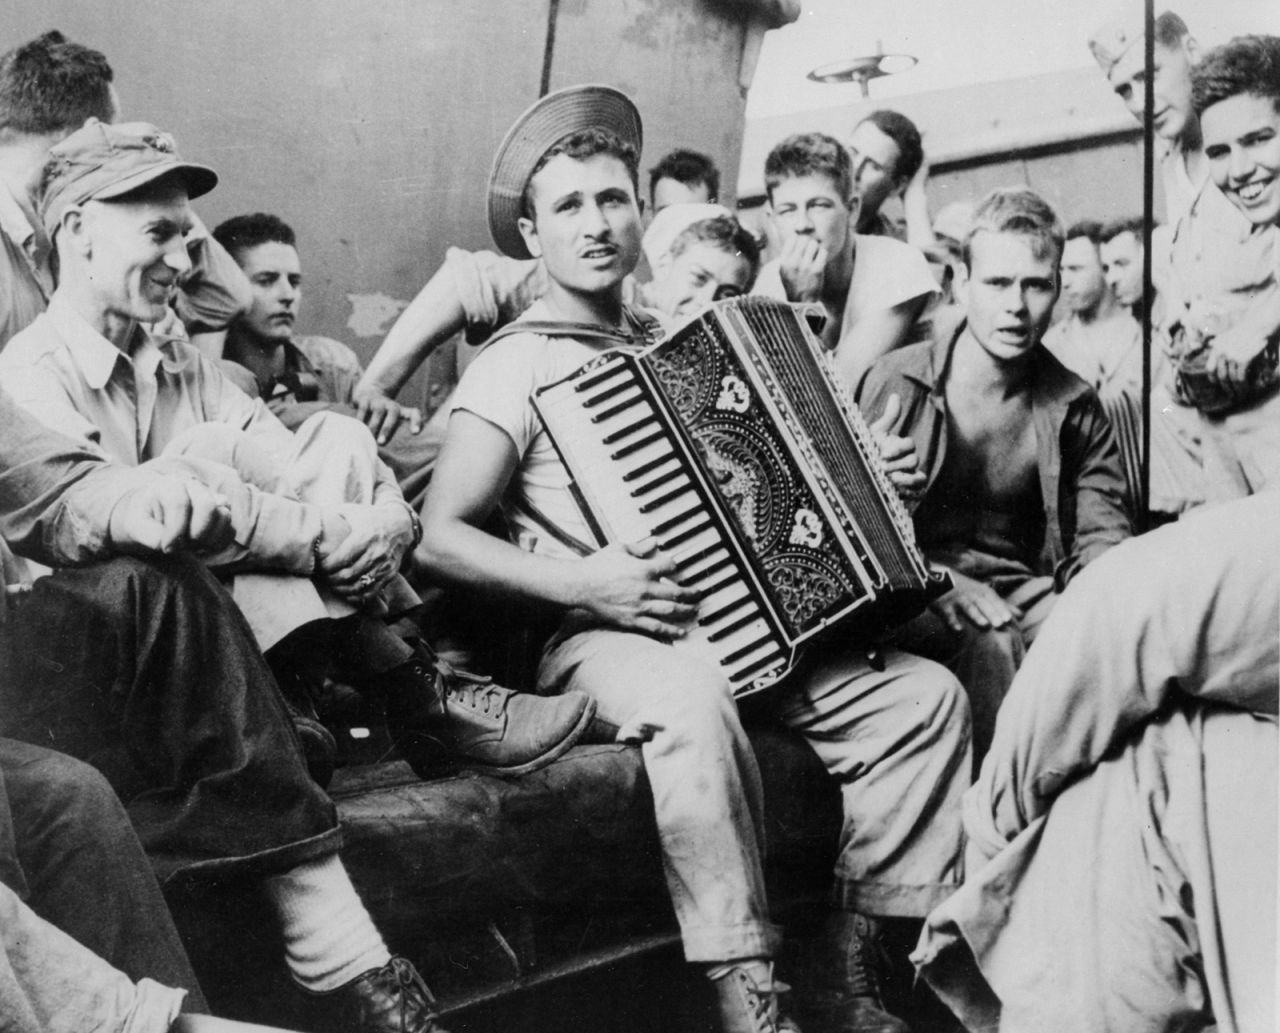 War correspondent Ernie Pyle (1900-1945, far left) observes life aboard a U.S. troopship on its way to Okinawa.